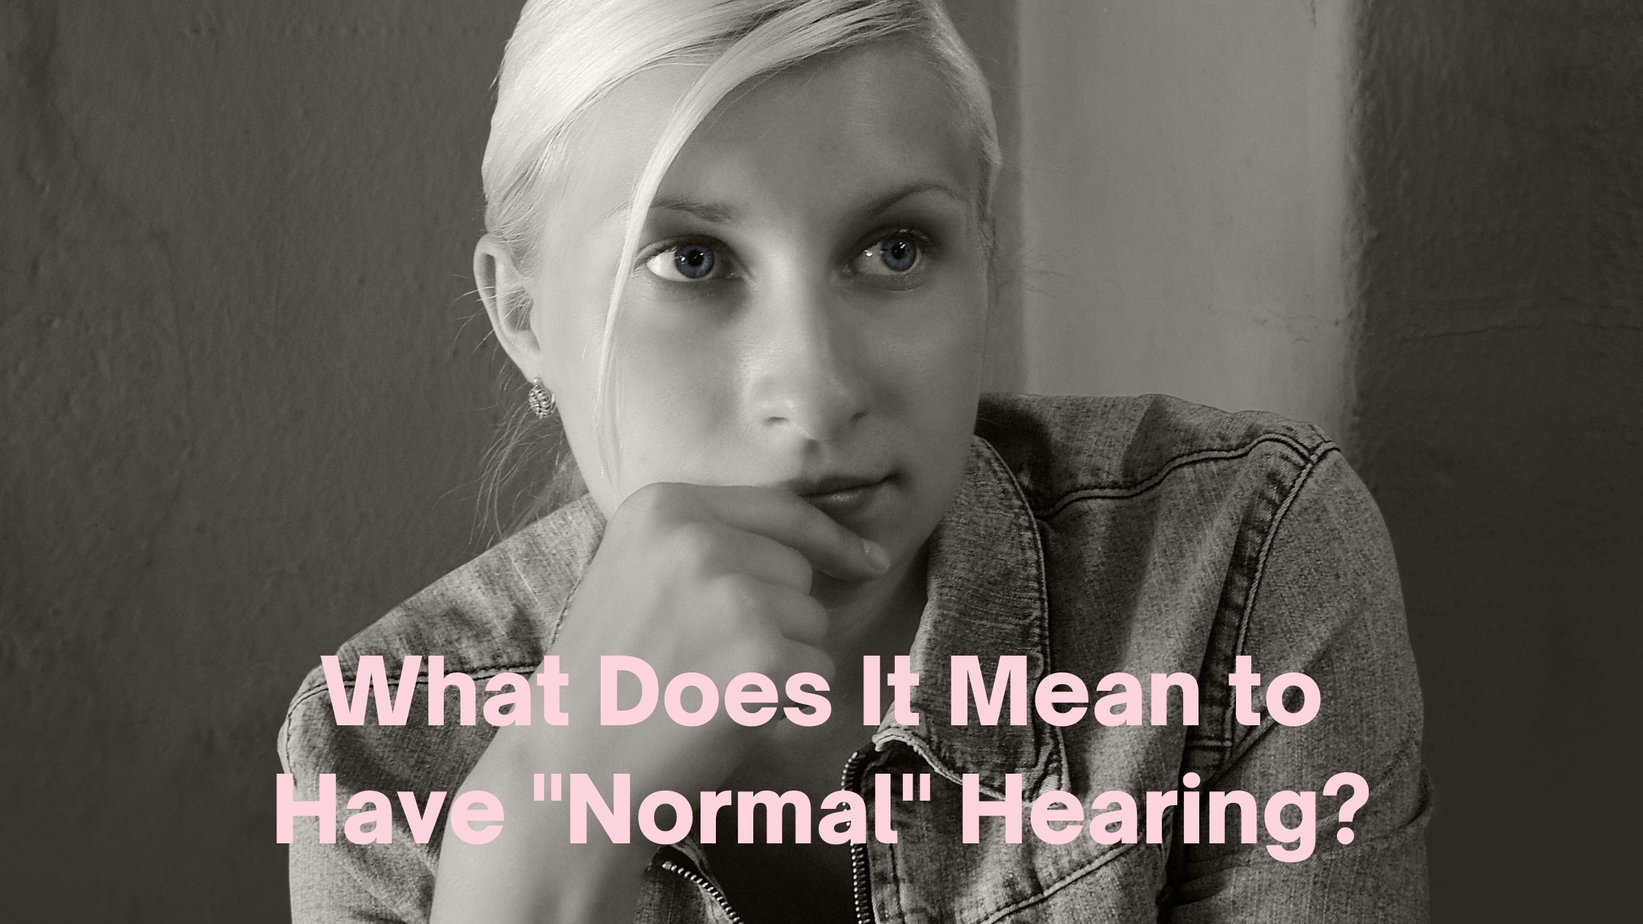 What Does It Mean to Have "Normal" Hearing?